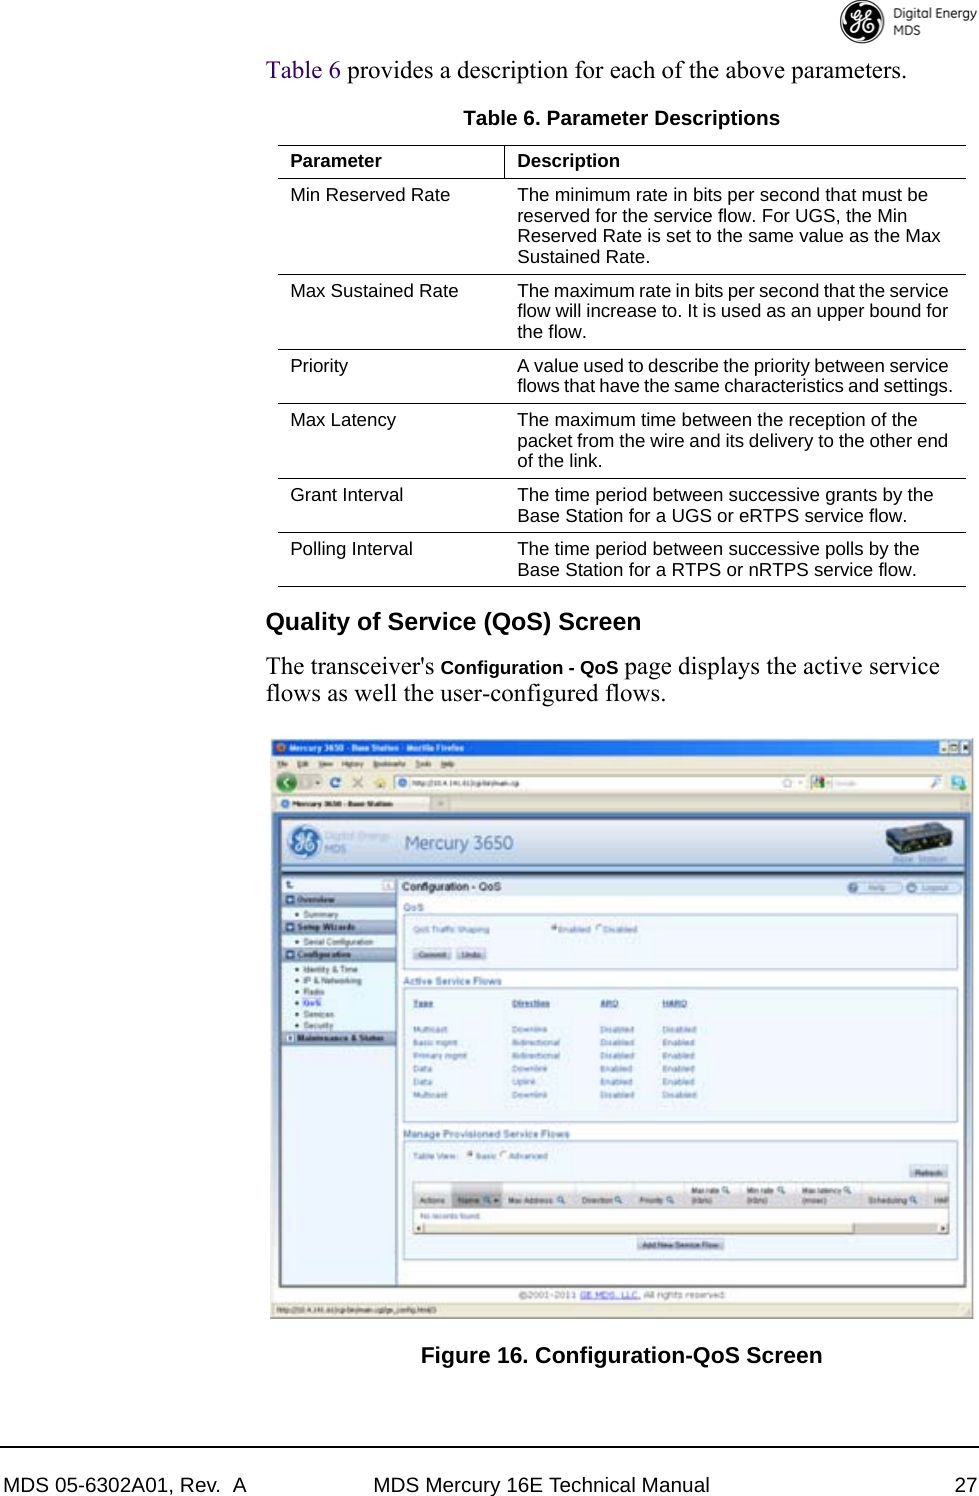 MDS 05-6302A01, Rev.  A MDS Mercury 16E Technical Manual 27Table 6 provides a description for each of the above parameters.Quality of Service (QoS) ScreenThe transceiver&apos;s Configuration - QoS page displays the active service flows as well the user-configured flows.Figure 16. Configuration-QoS ScreenTable 6. Parameter DescriptionsParameter DescriptionMin Reserved Rate The minimum rate in bits per second that must be reserved for the service flow. For UGS, the Min Reserved Rate is set to the same value as the Max Sustained Rate.Max Sustained Rate The maximum rate in bits per second that the service flow will increase to. It is used as an upper bound for the flow.Priority A value used to describe the priority between service flows that have the same characteristics and settings.Max Latency The maximum time between the reception of the packet from the wire and its delivery to the other end of the link.Grant Interval The time period between successive grants by the Base Station for a UGS or eRTPS service flow.Polling Interval The time period between successive polls by the Base Station for a RTPS or nRTPS service flow.